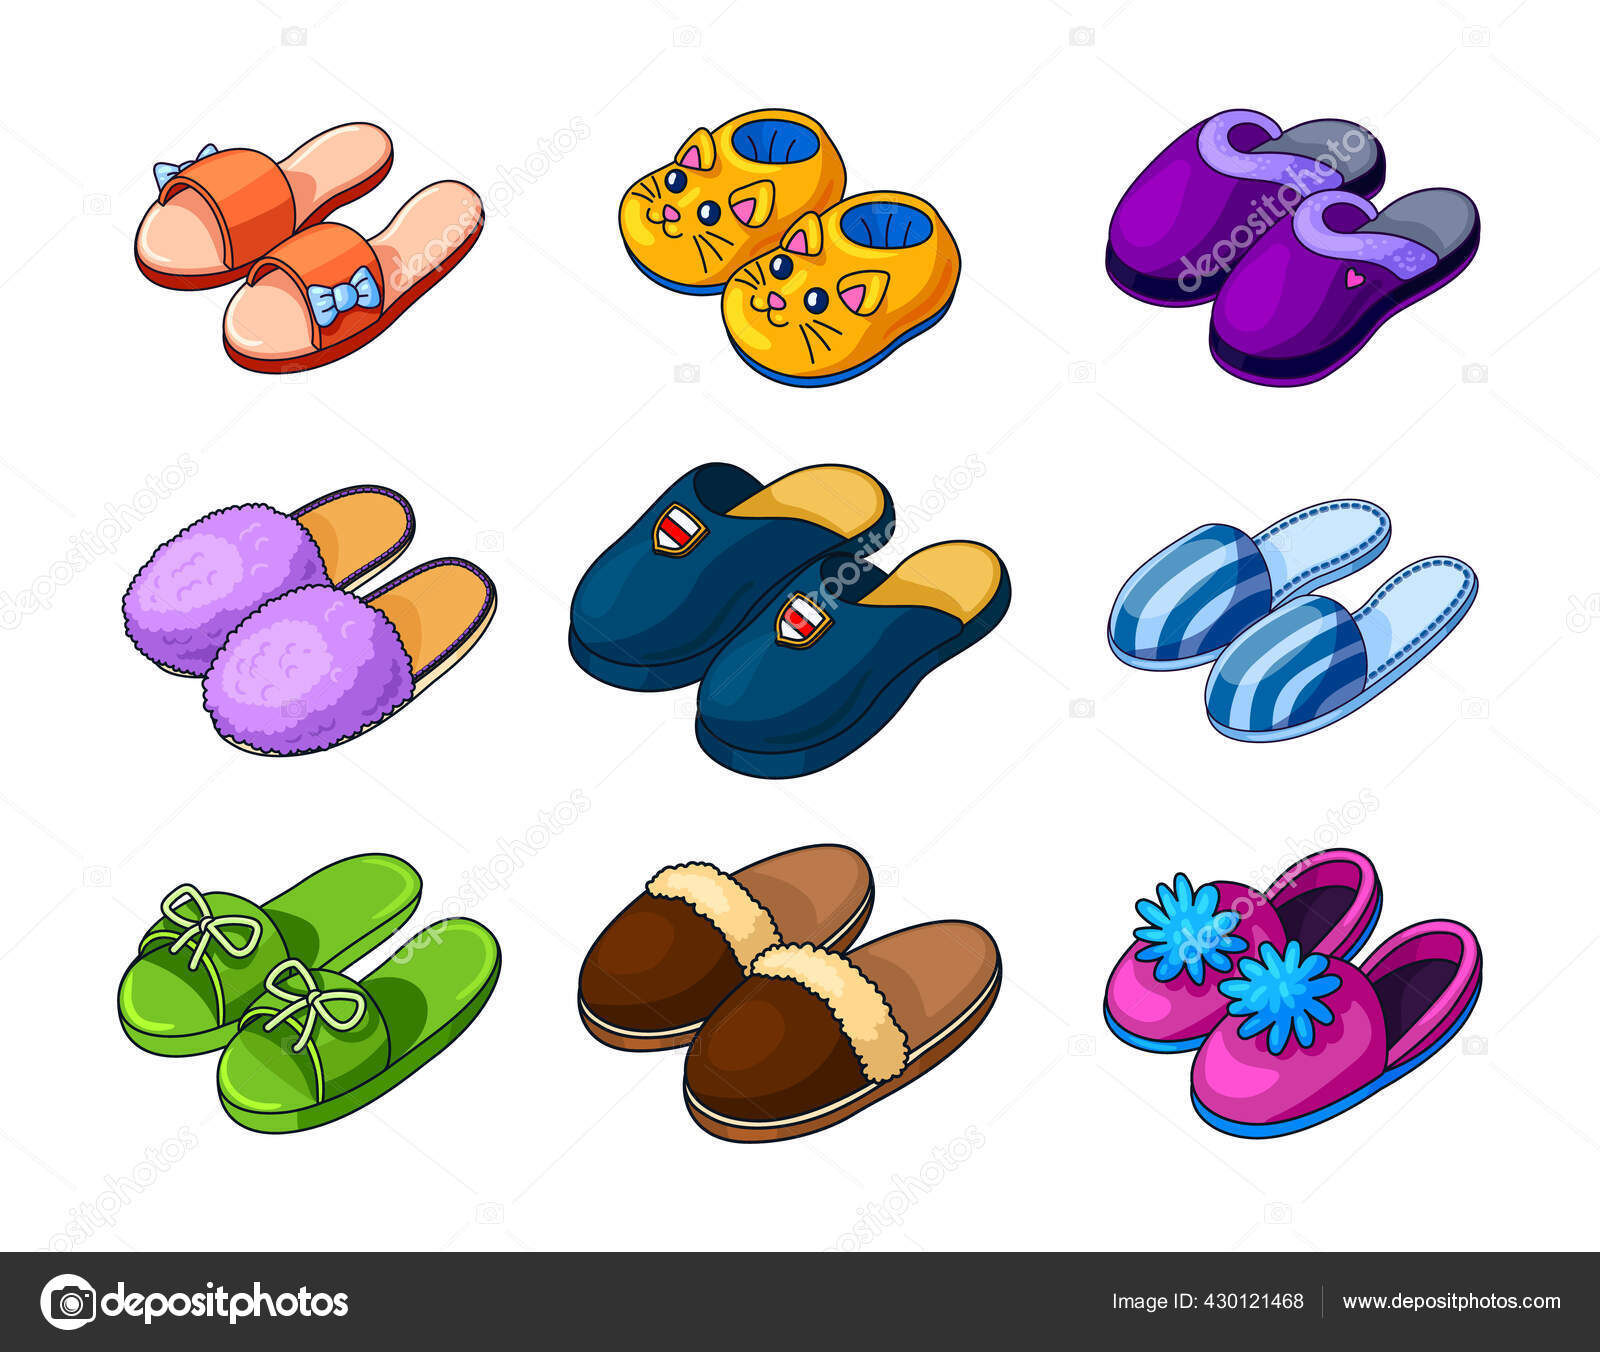 Cartoon Slippers PNG Transparent, Hand Drawn Cartoon Lifestyle Supplies  Slippers, Hand Painted, Cartoon, Daily Necessities PNG Image For Free  Download